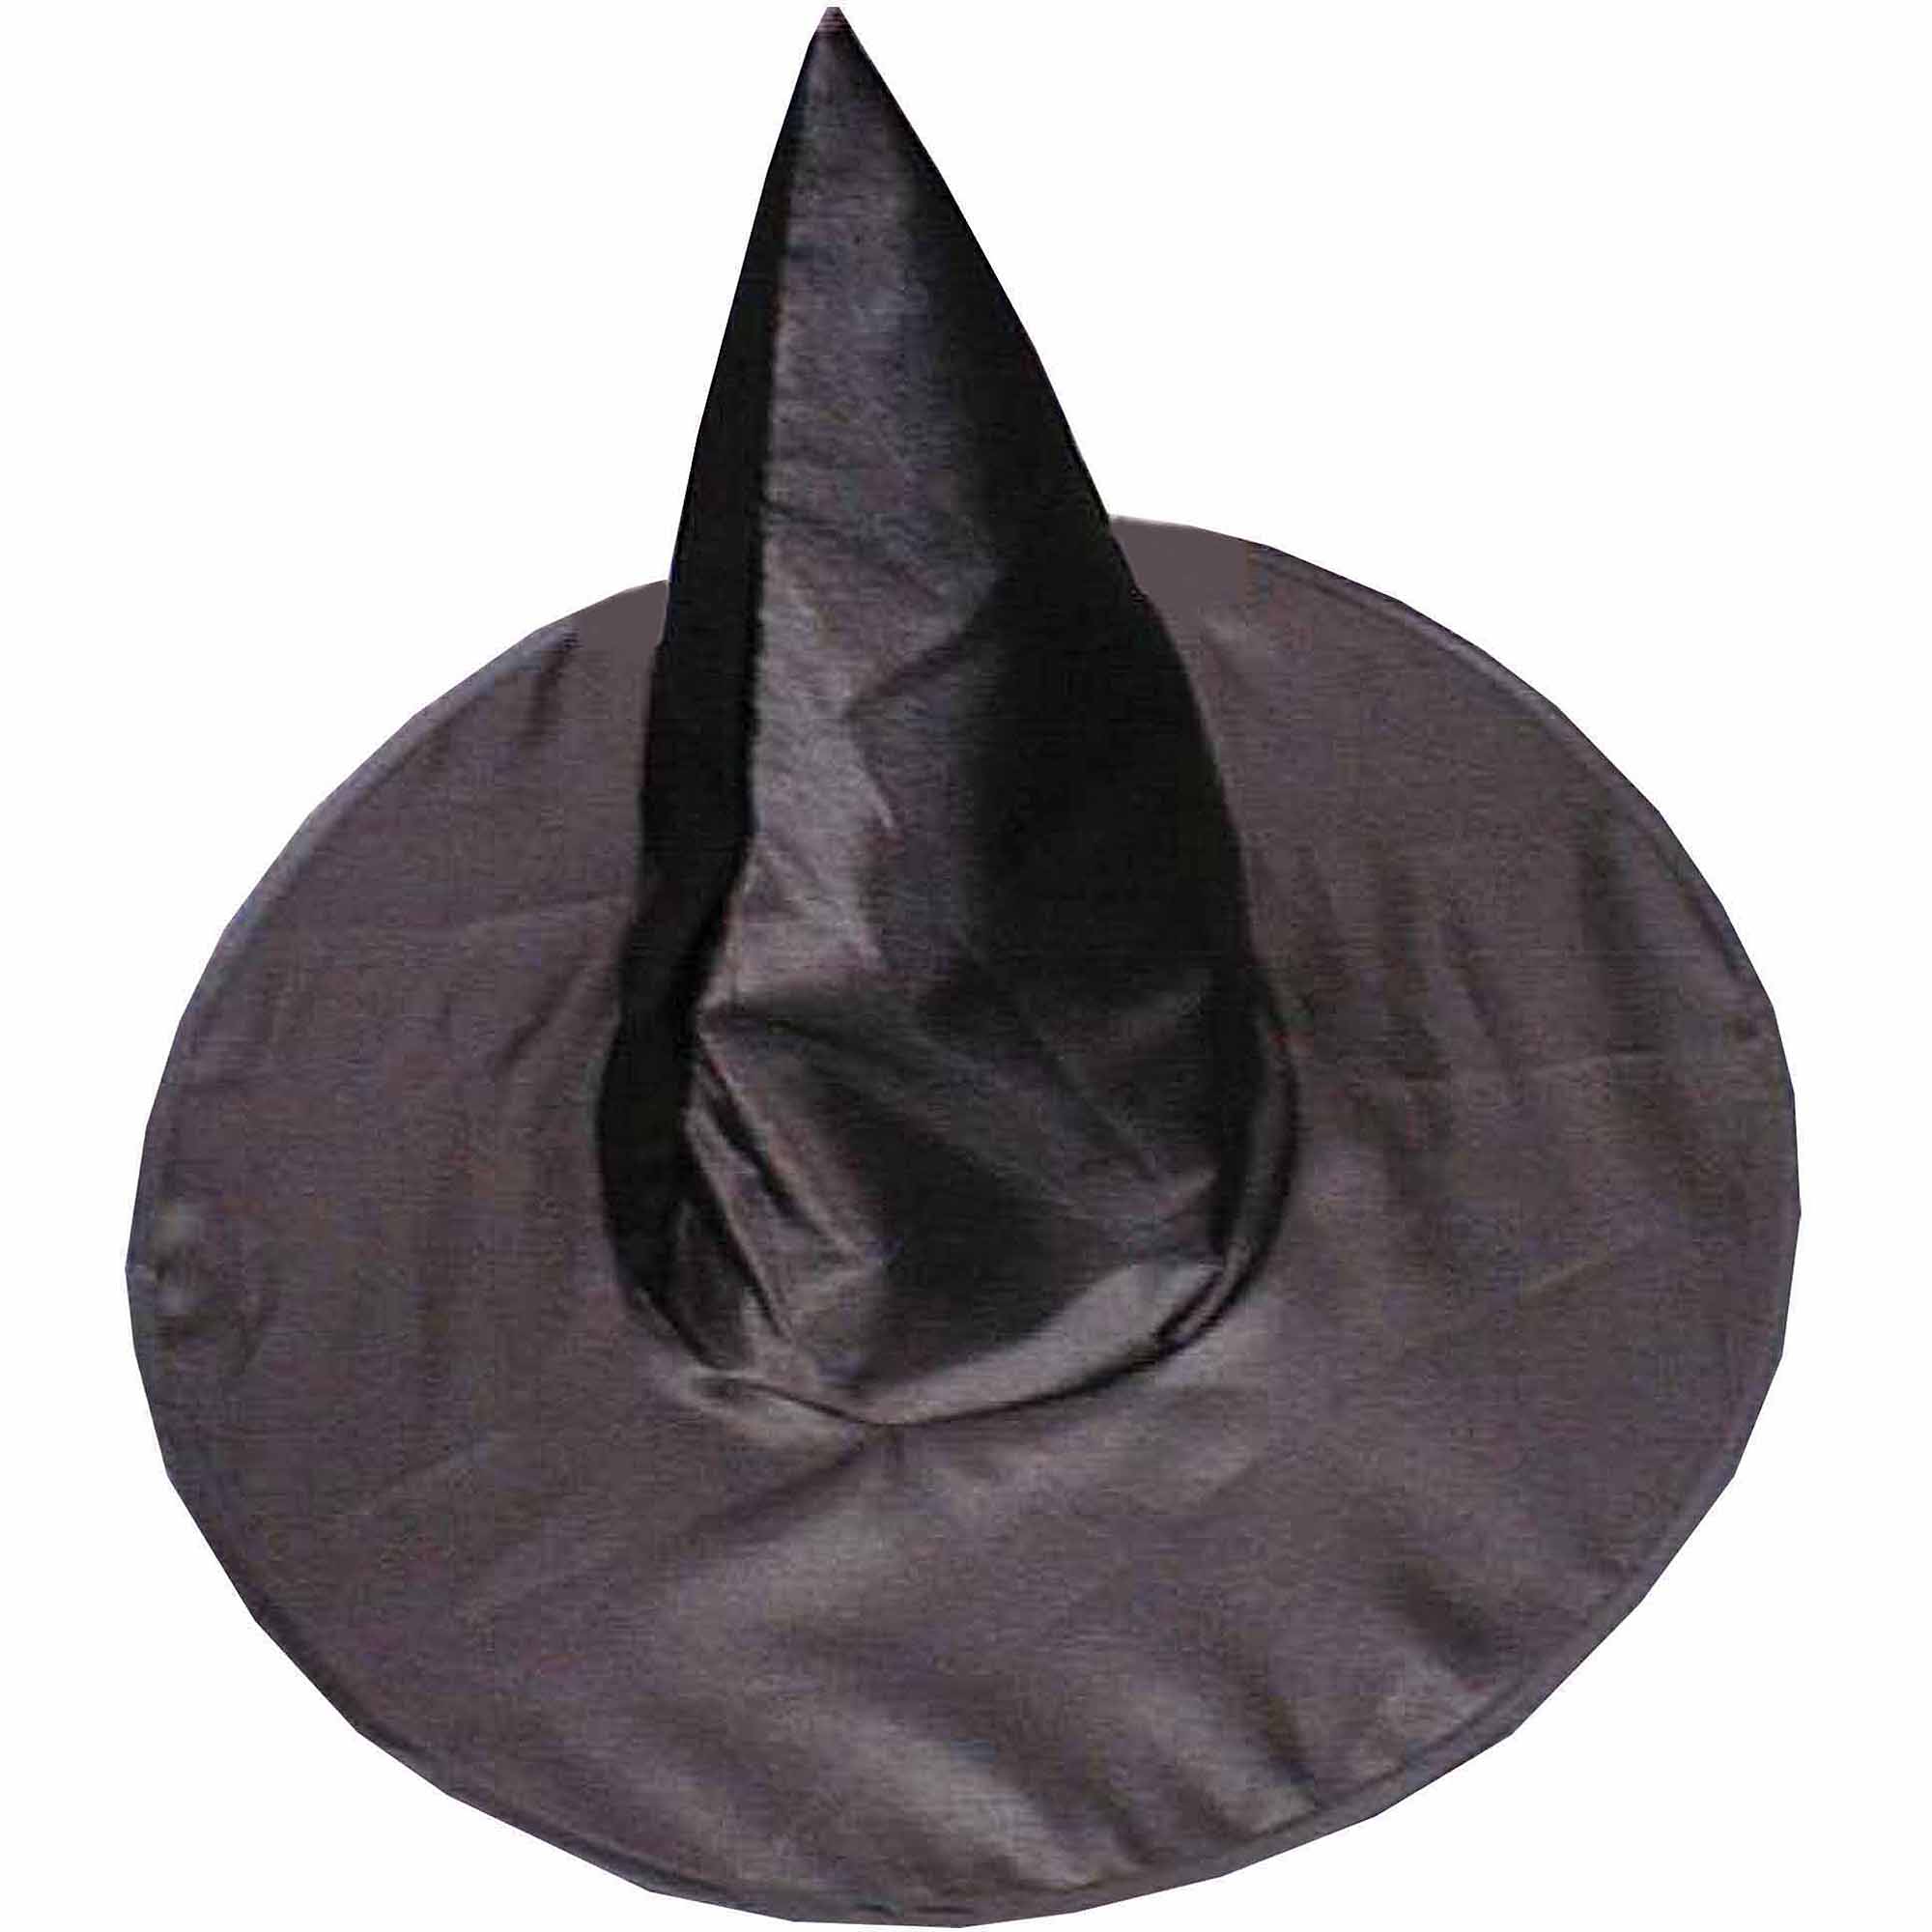 Morris Costumes Witch Hat Deluxe Satin Child - image 1 of 2